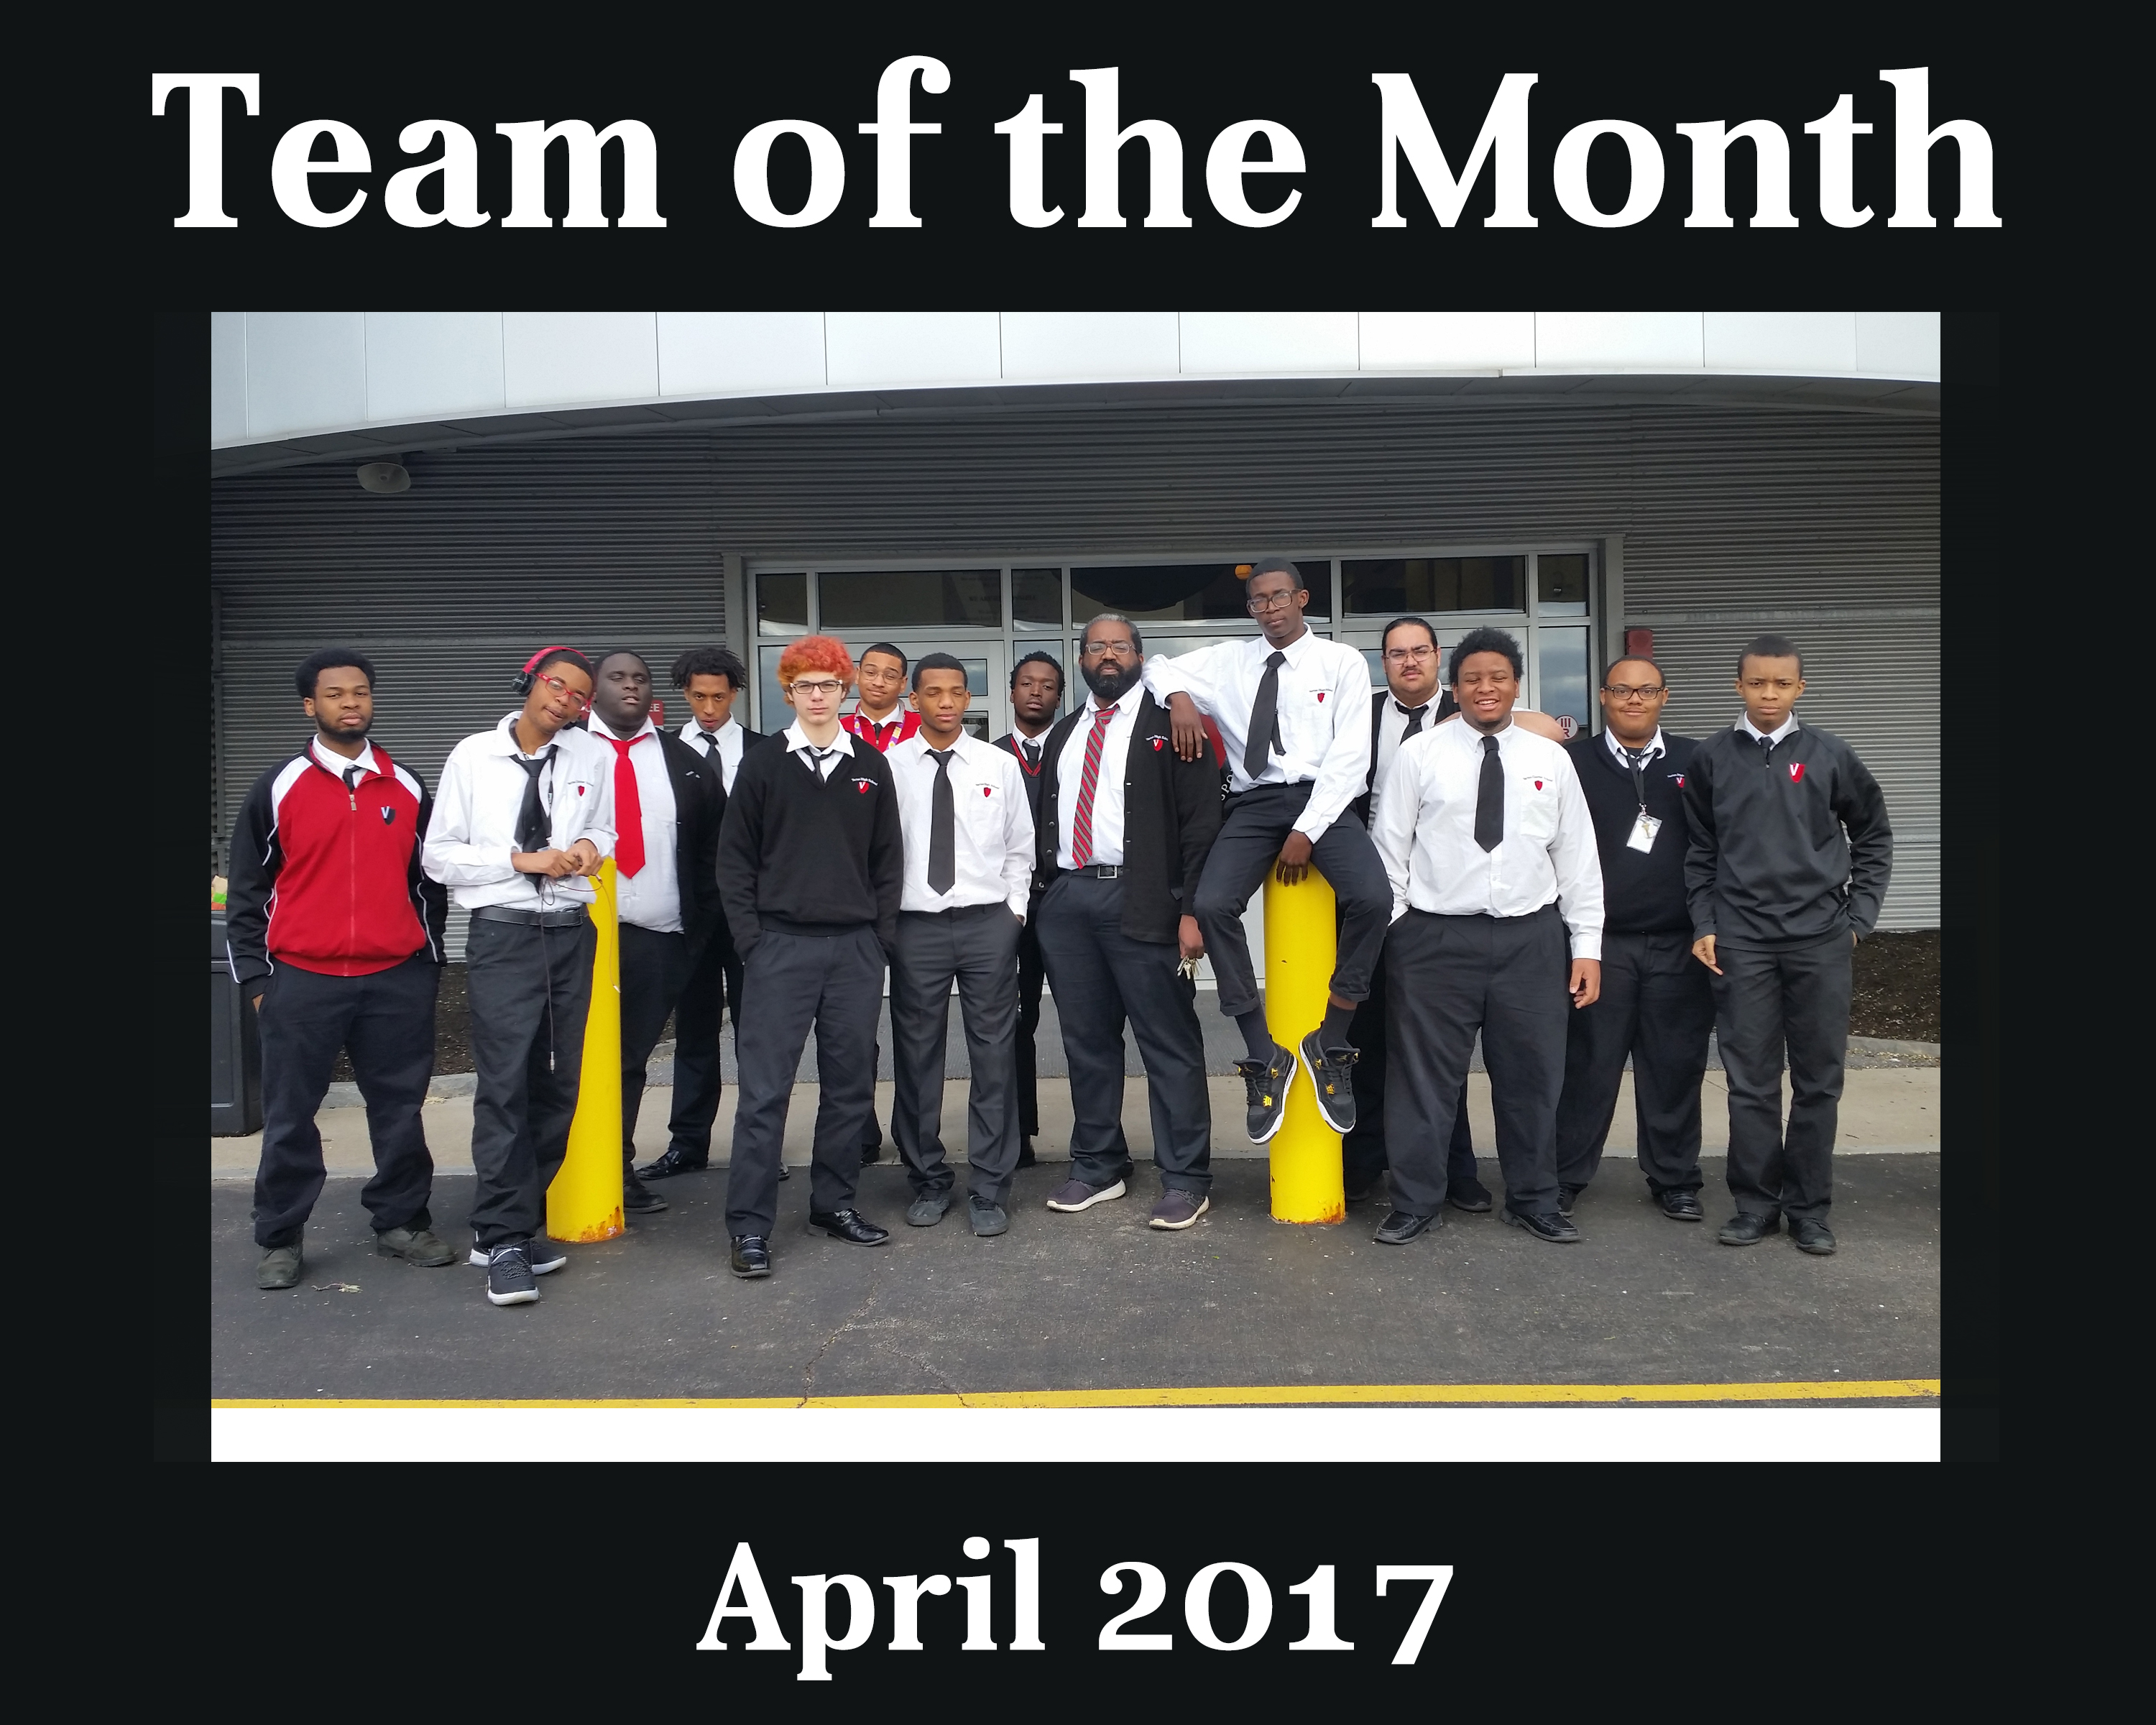 Team of the Month - April 2017